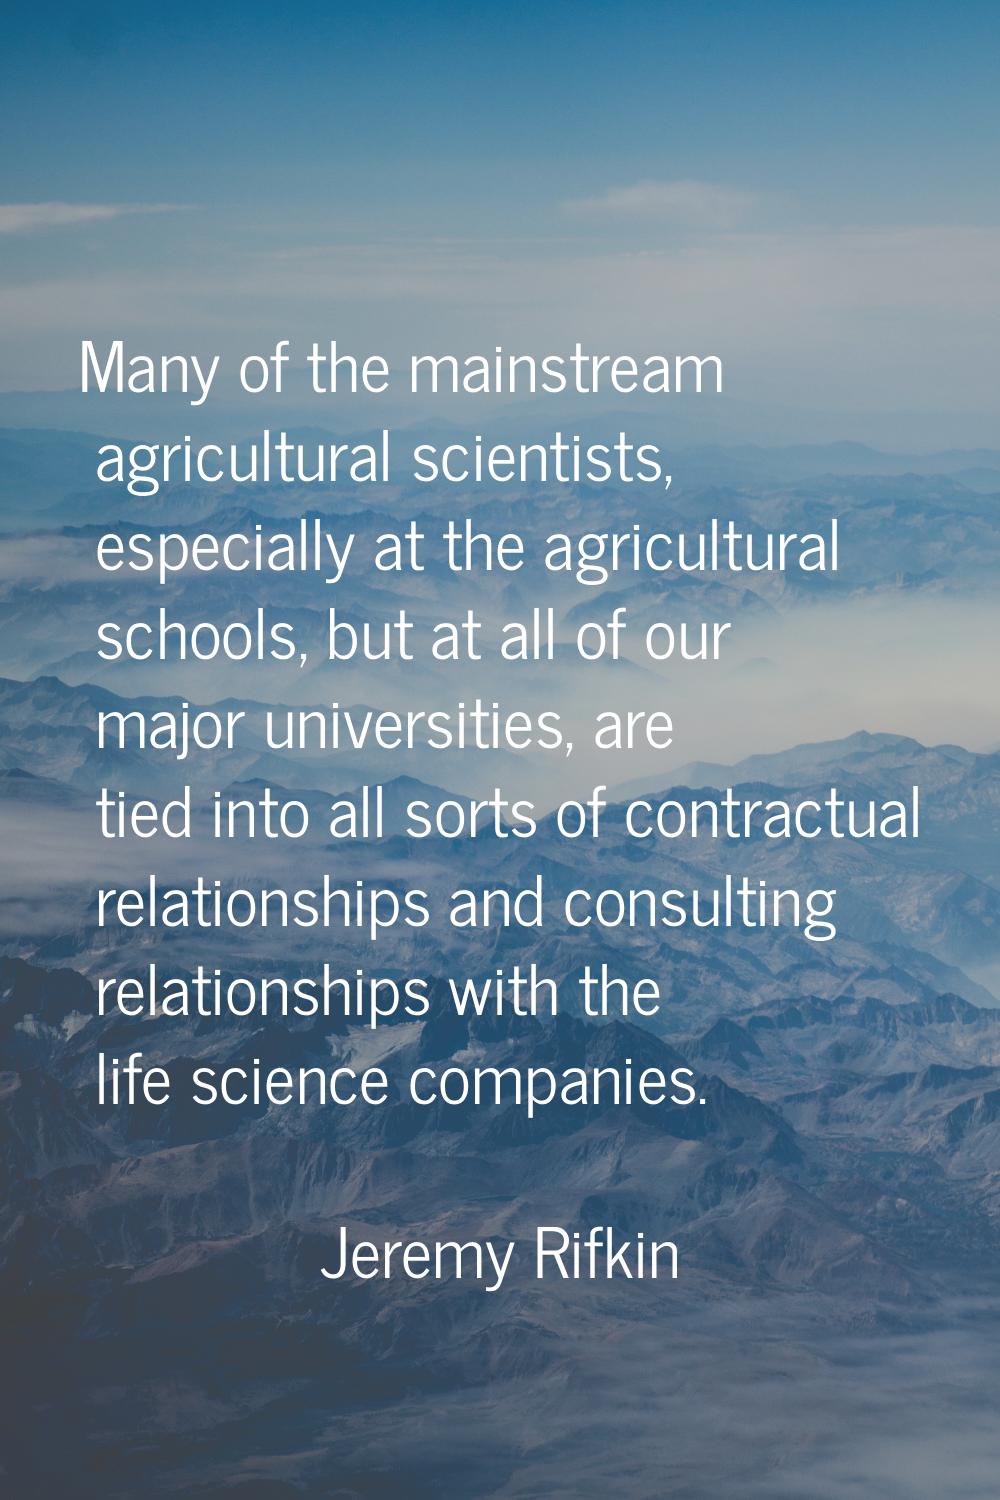 Many of the mainstream agricultural scientists, especially at the agricultural schools, but at all 